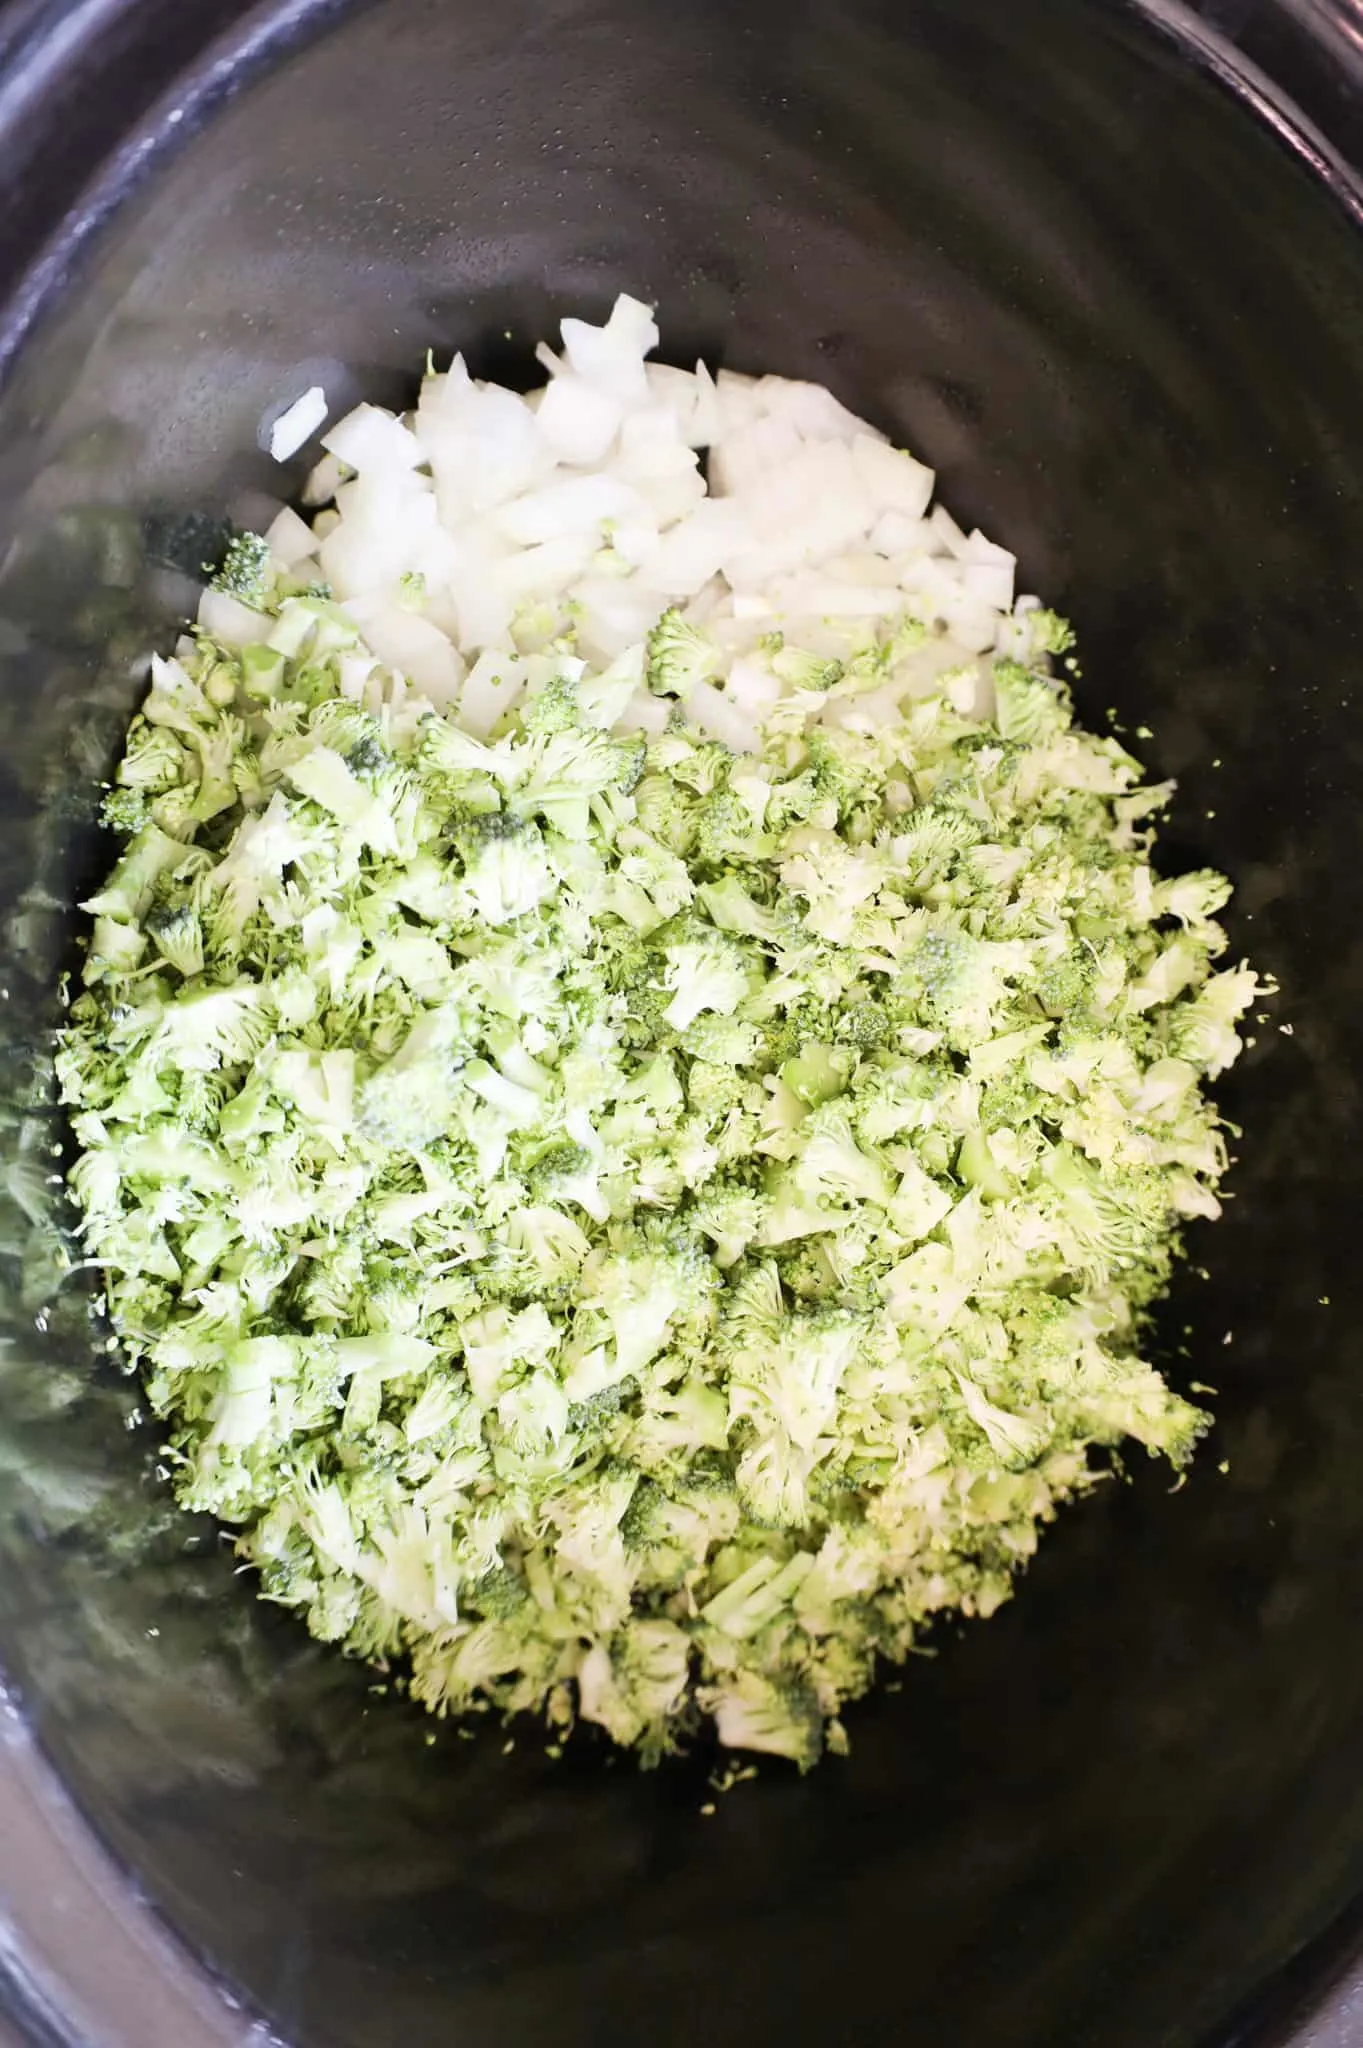 chopped broccoli florets and diced onions in a crock pot